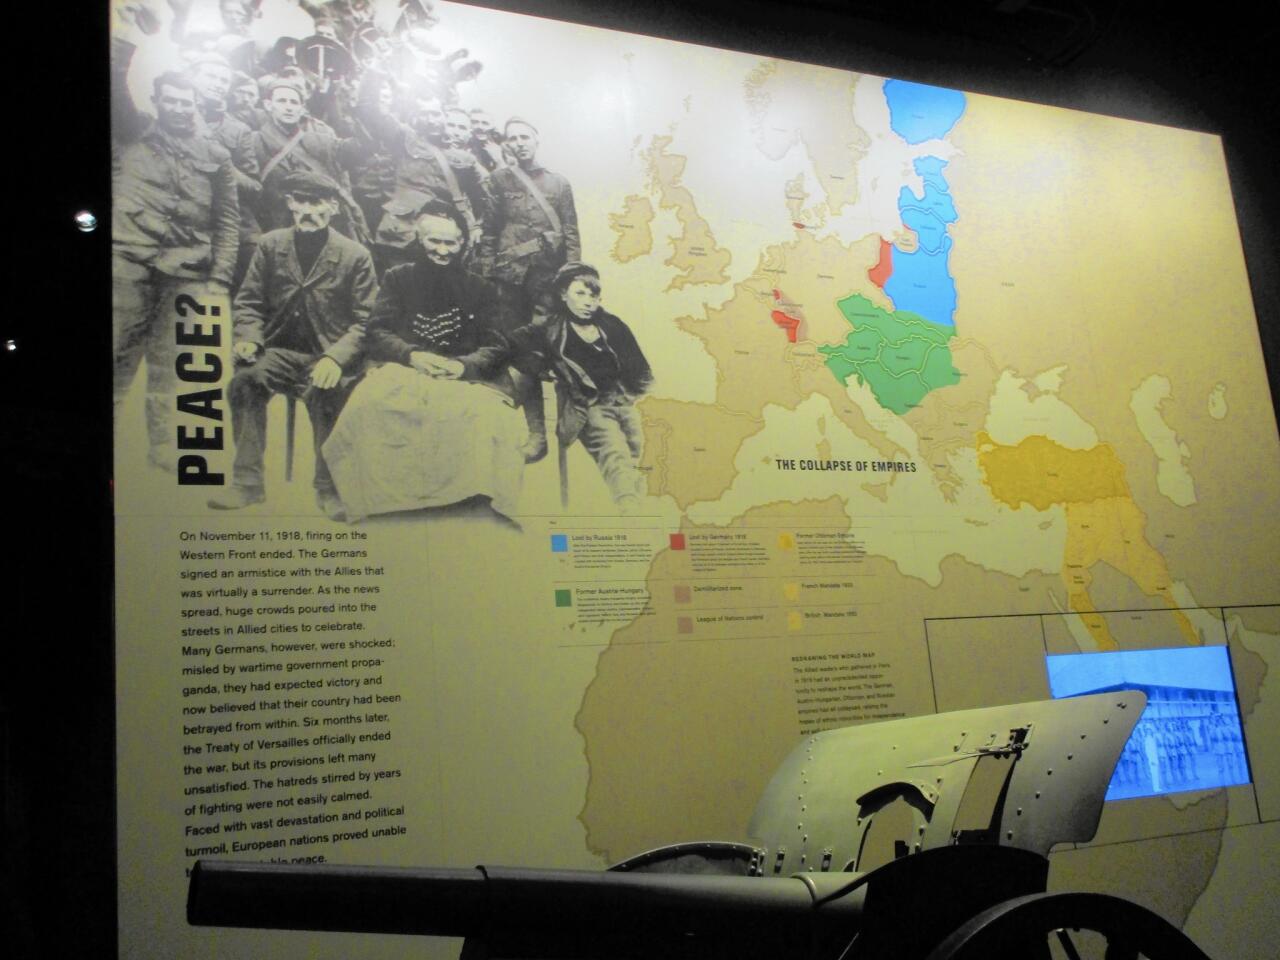 Throughout the museum, large maps and graphics help explain World War I.